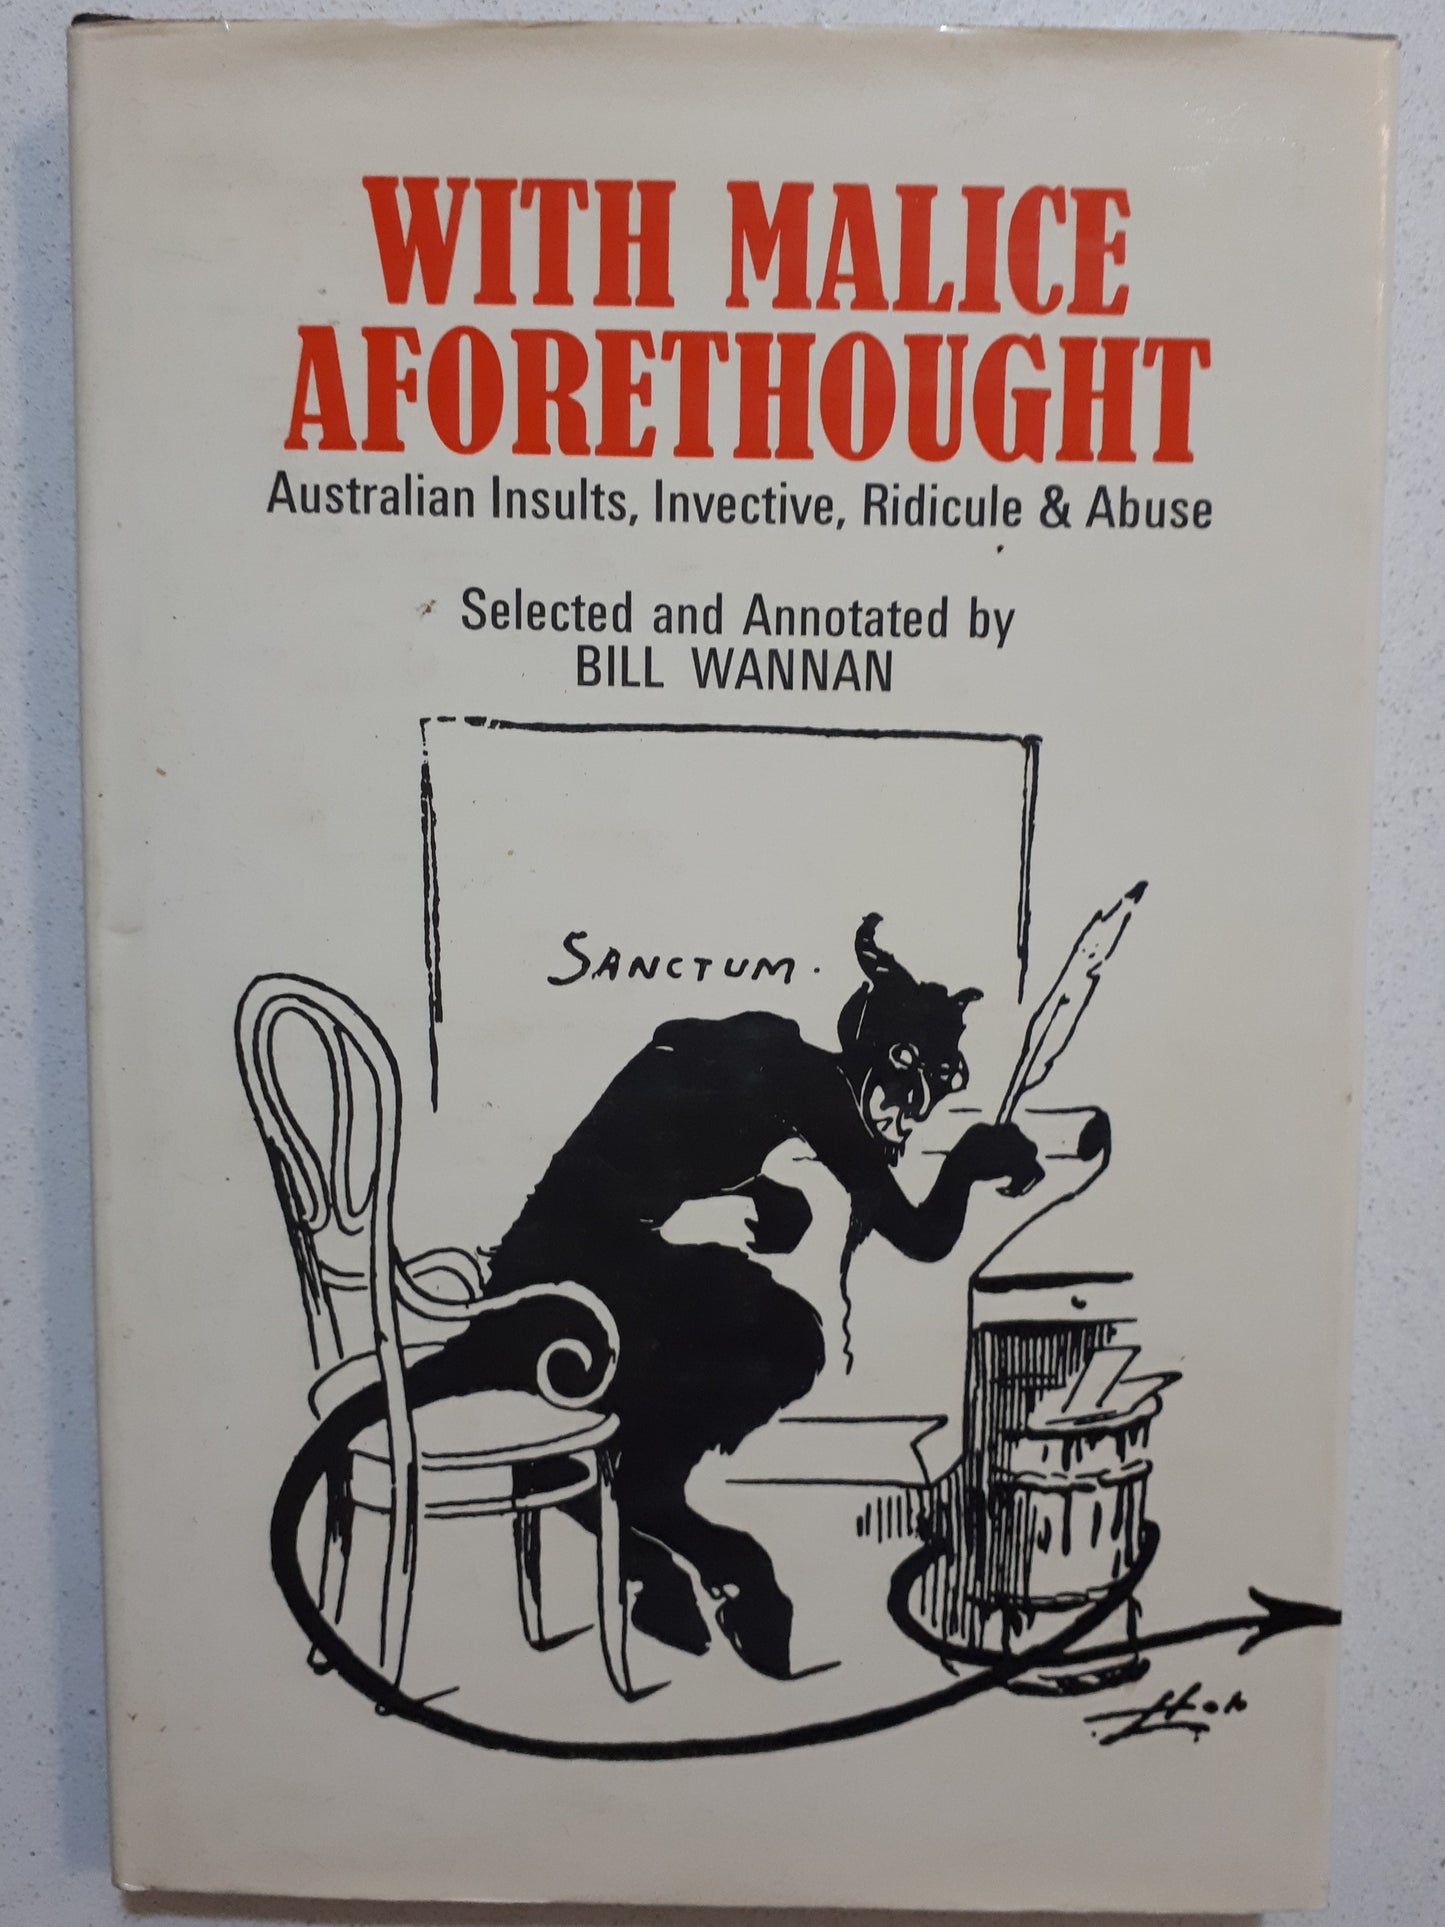 With Malice Aforethought by Bill Wannan